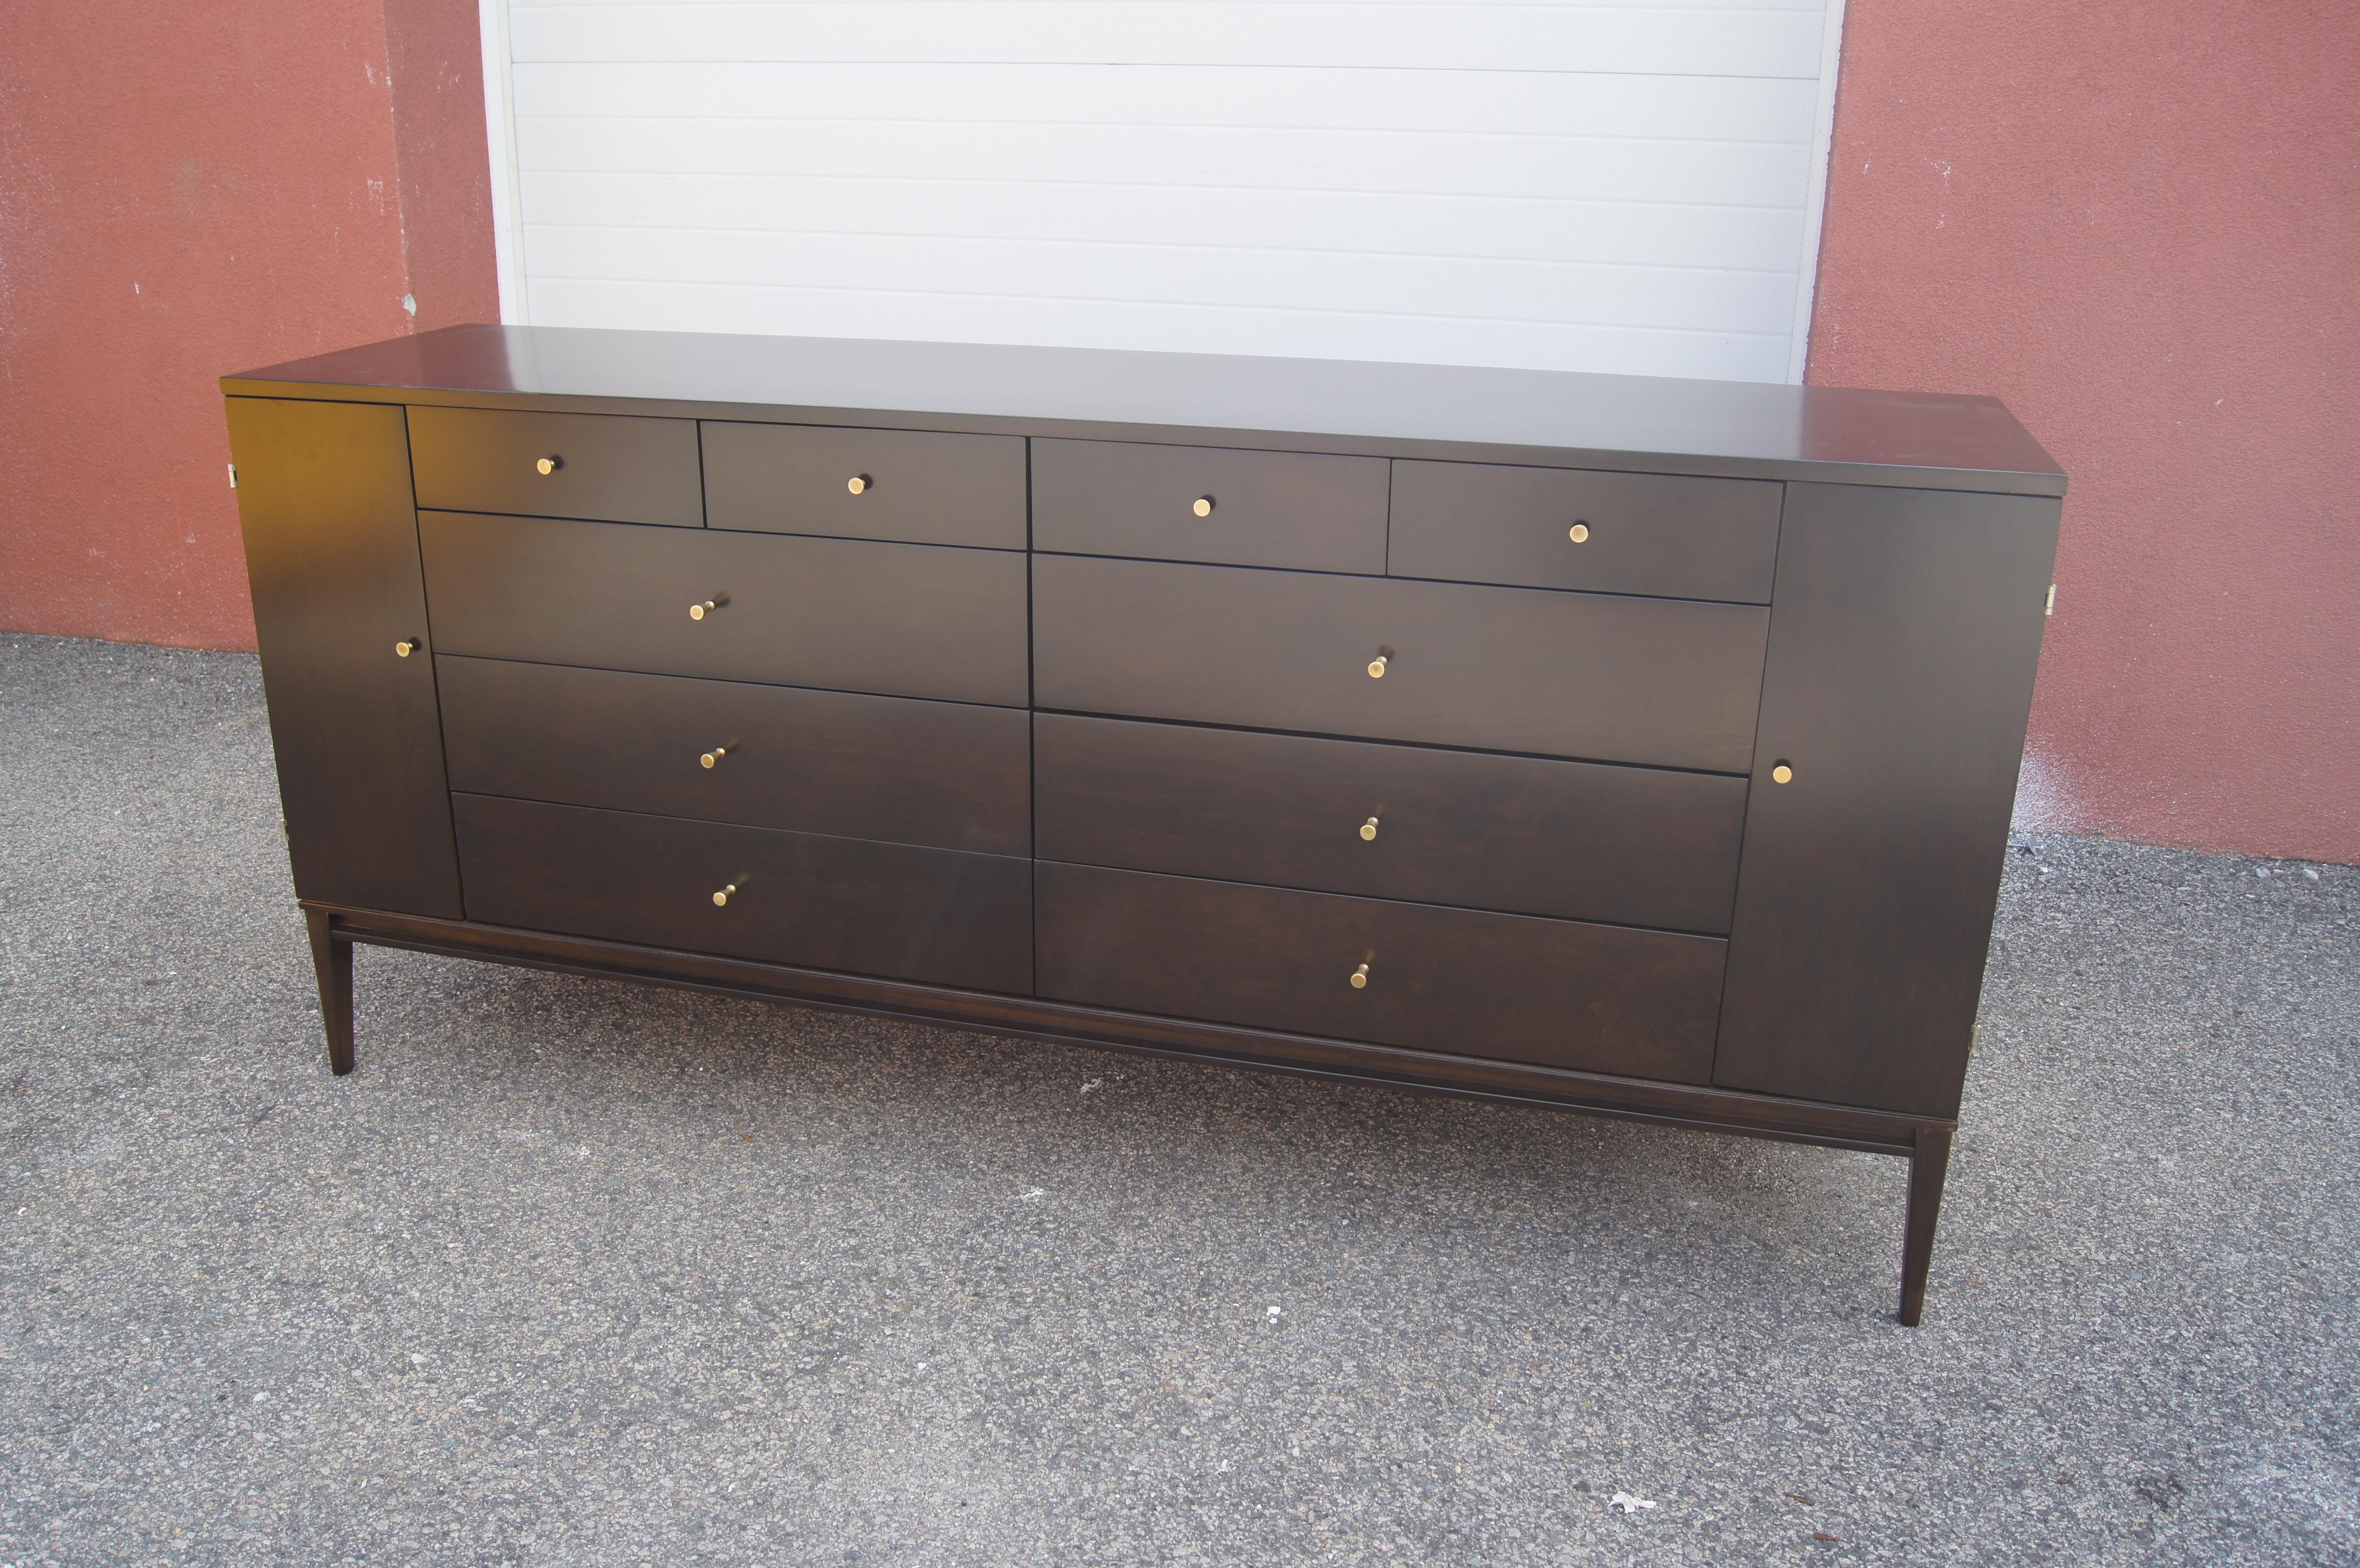 Designed by Paul McCobb for Rapid's Furniture of Massachusetts, this handsome dresser is made of solid maple with a dark lacquer finish. Sitting on tapered legs, the case offers a total of twenty drawers. In the center are four small drawers above